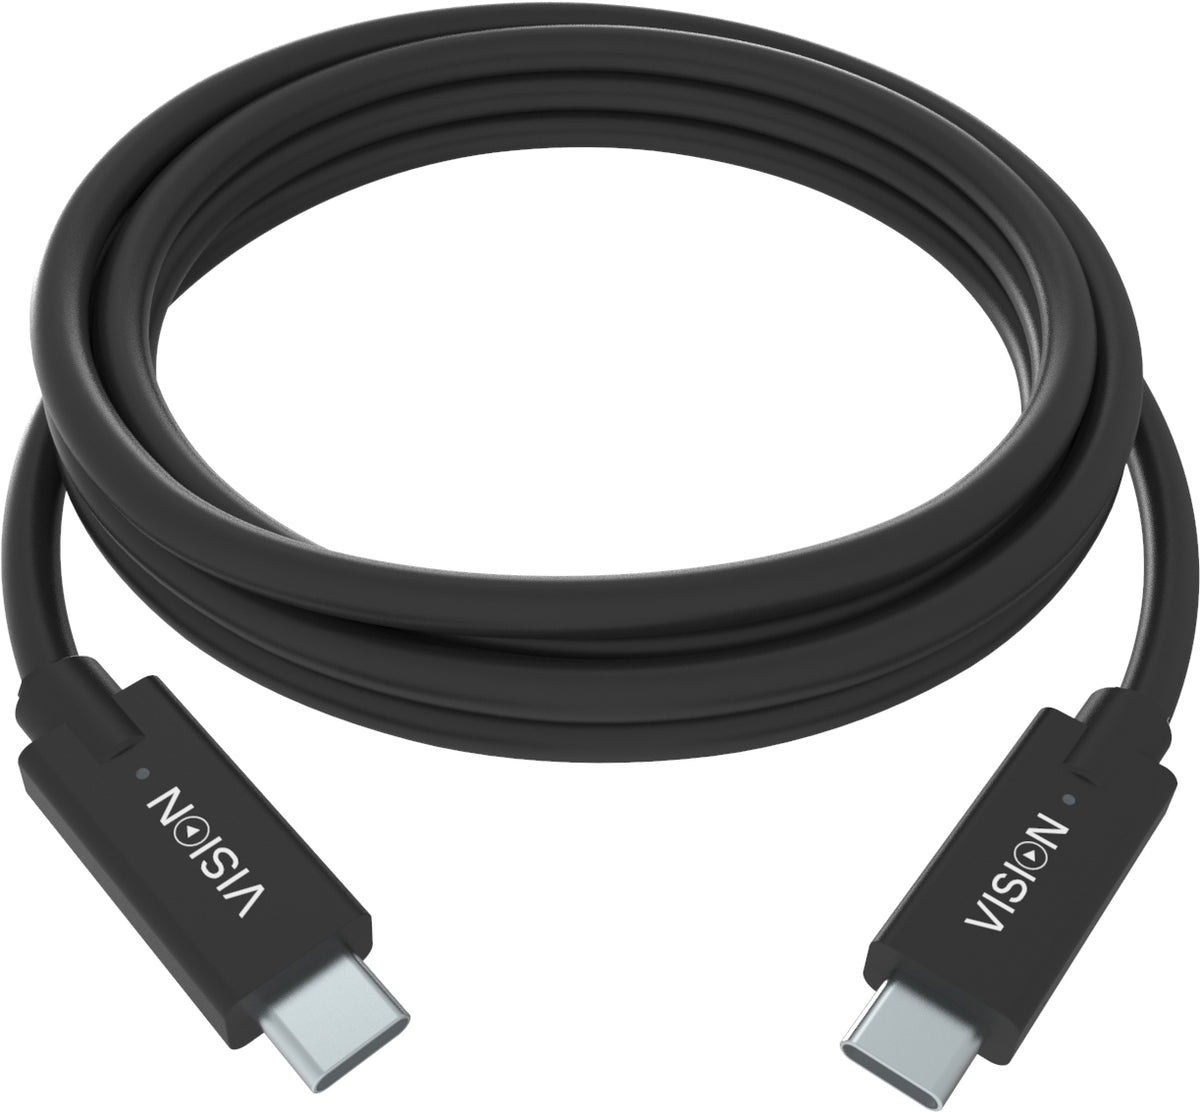 VISION Professional installation-grade USB-C cable - LIFETIME WARRANTY - bandwidth up to 10 gbit/s - supports 3A charging current - USB-C 3.1 (M) to USB-C 3.1 (M) - outer diameter 4.5 mm - 22+30 AWG - 2 m - black